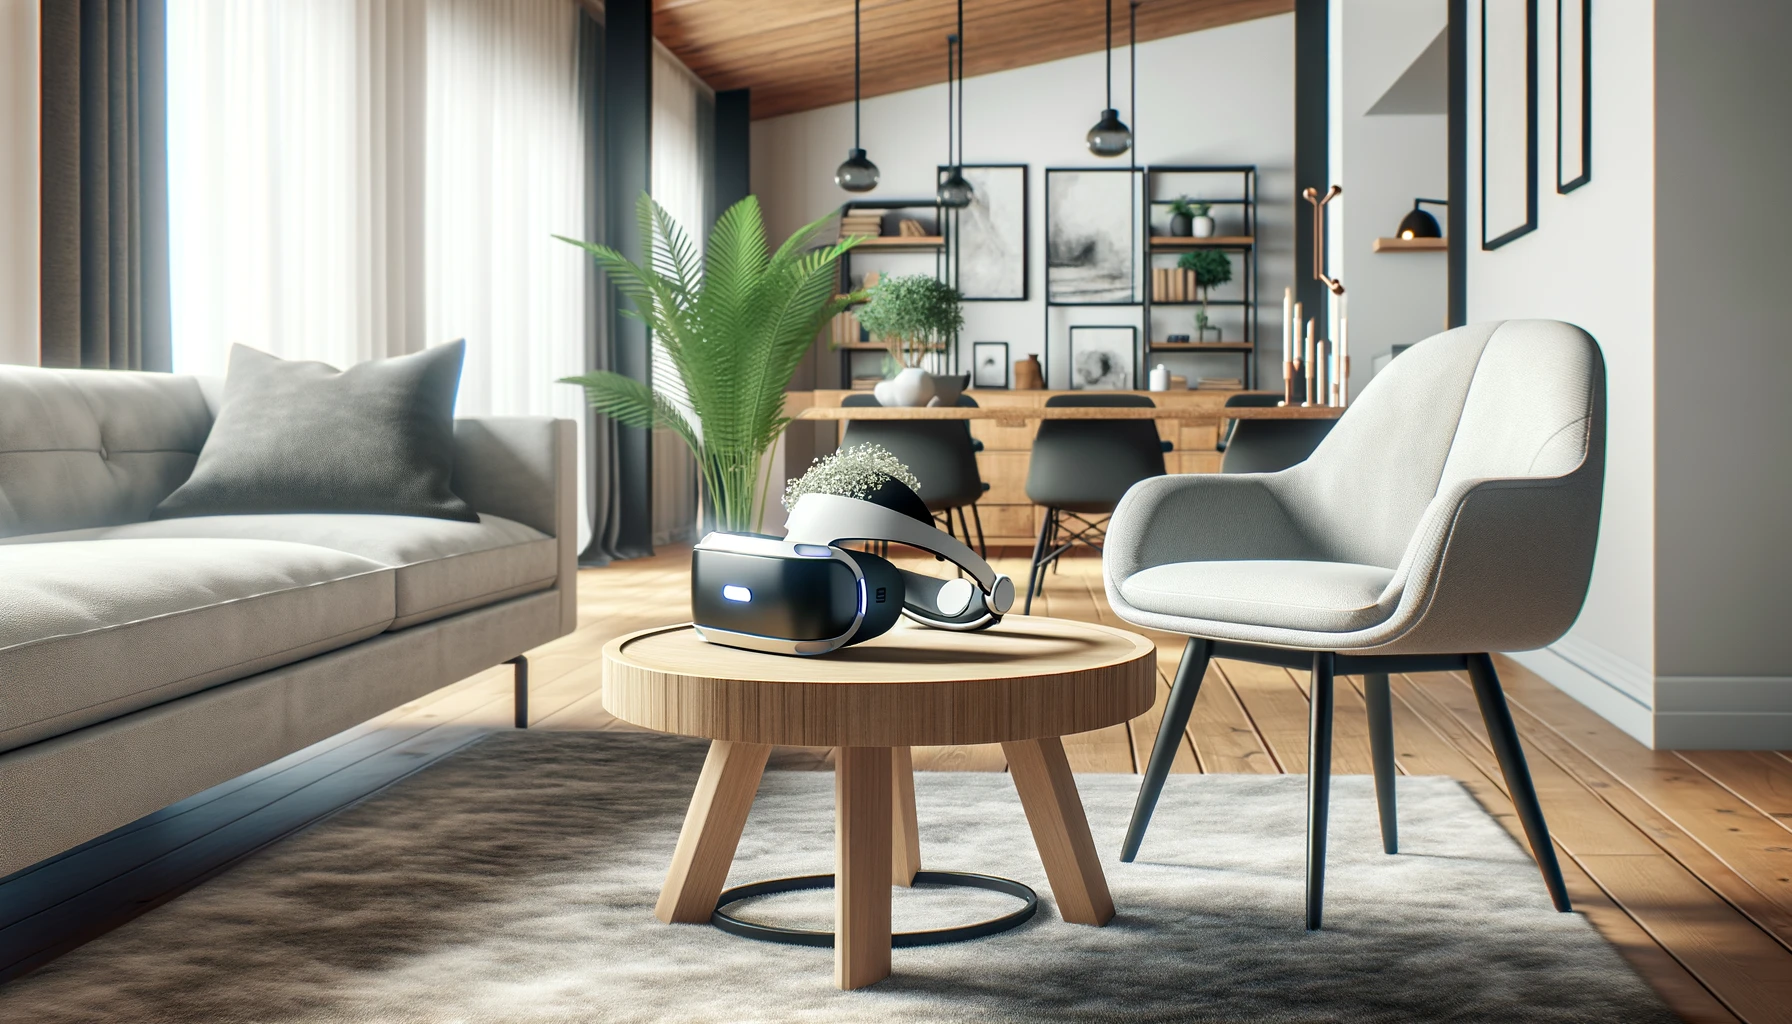 A modern, simple living room with a virtual reality headset on a coffee table. The room embody a cozy, inviting environment